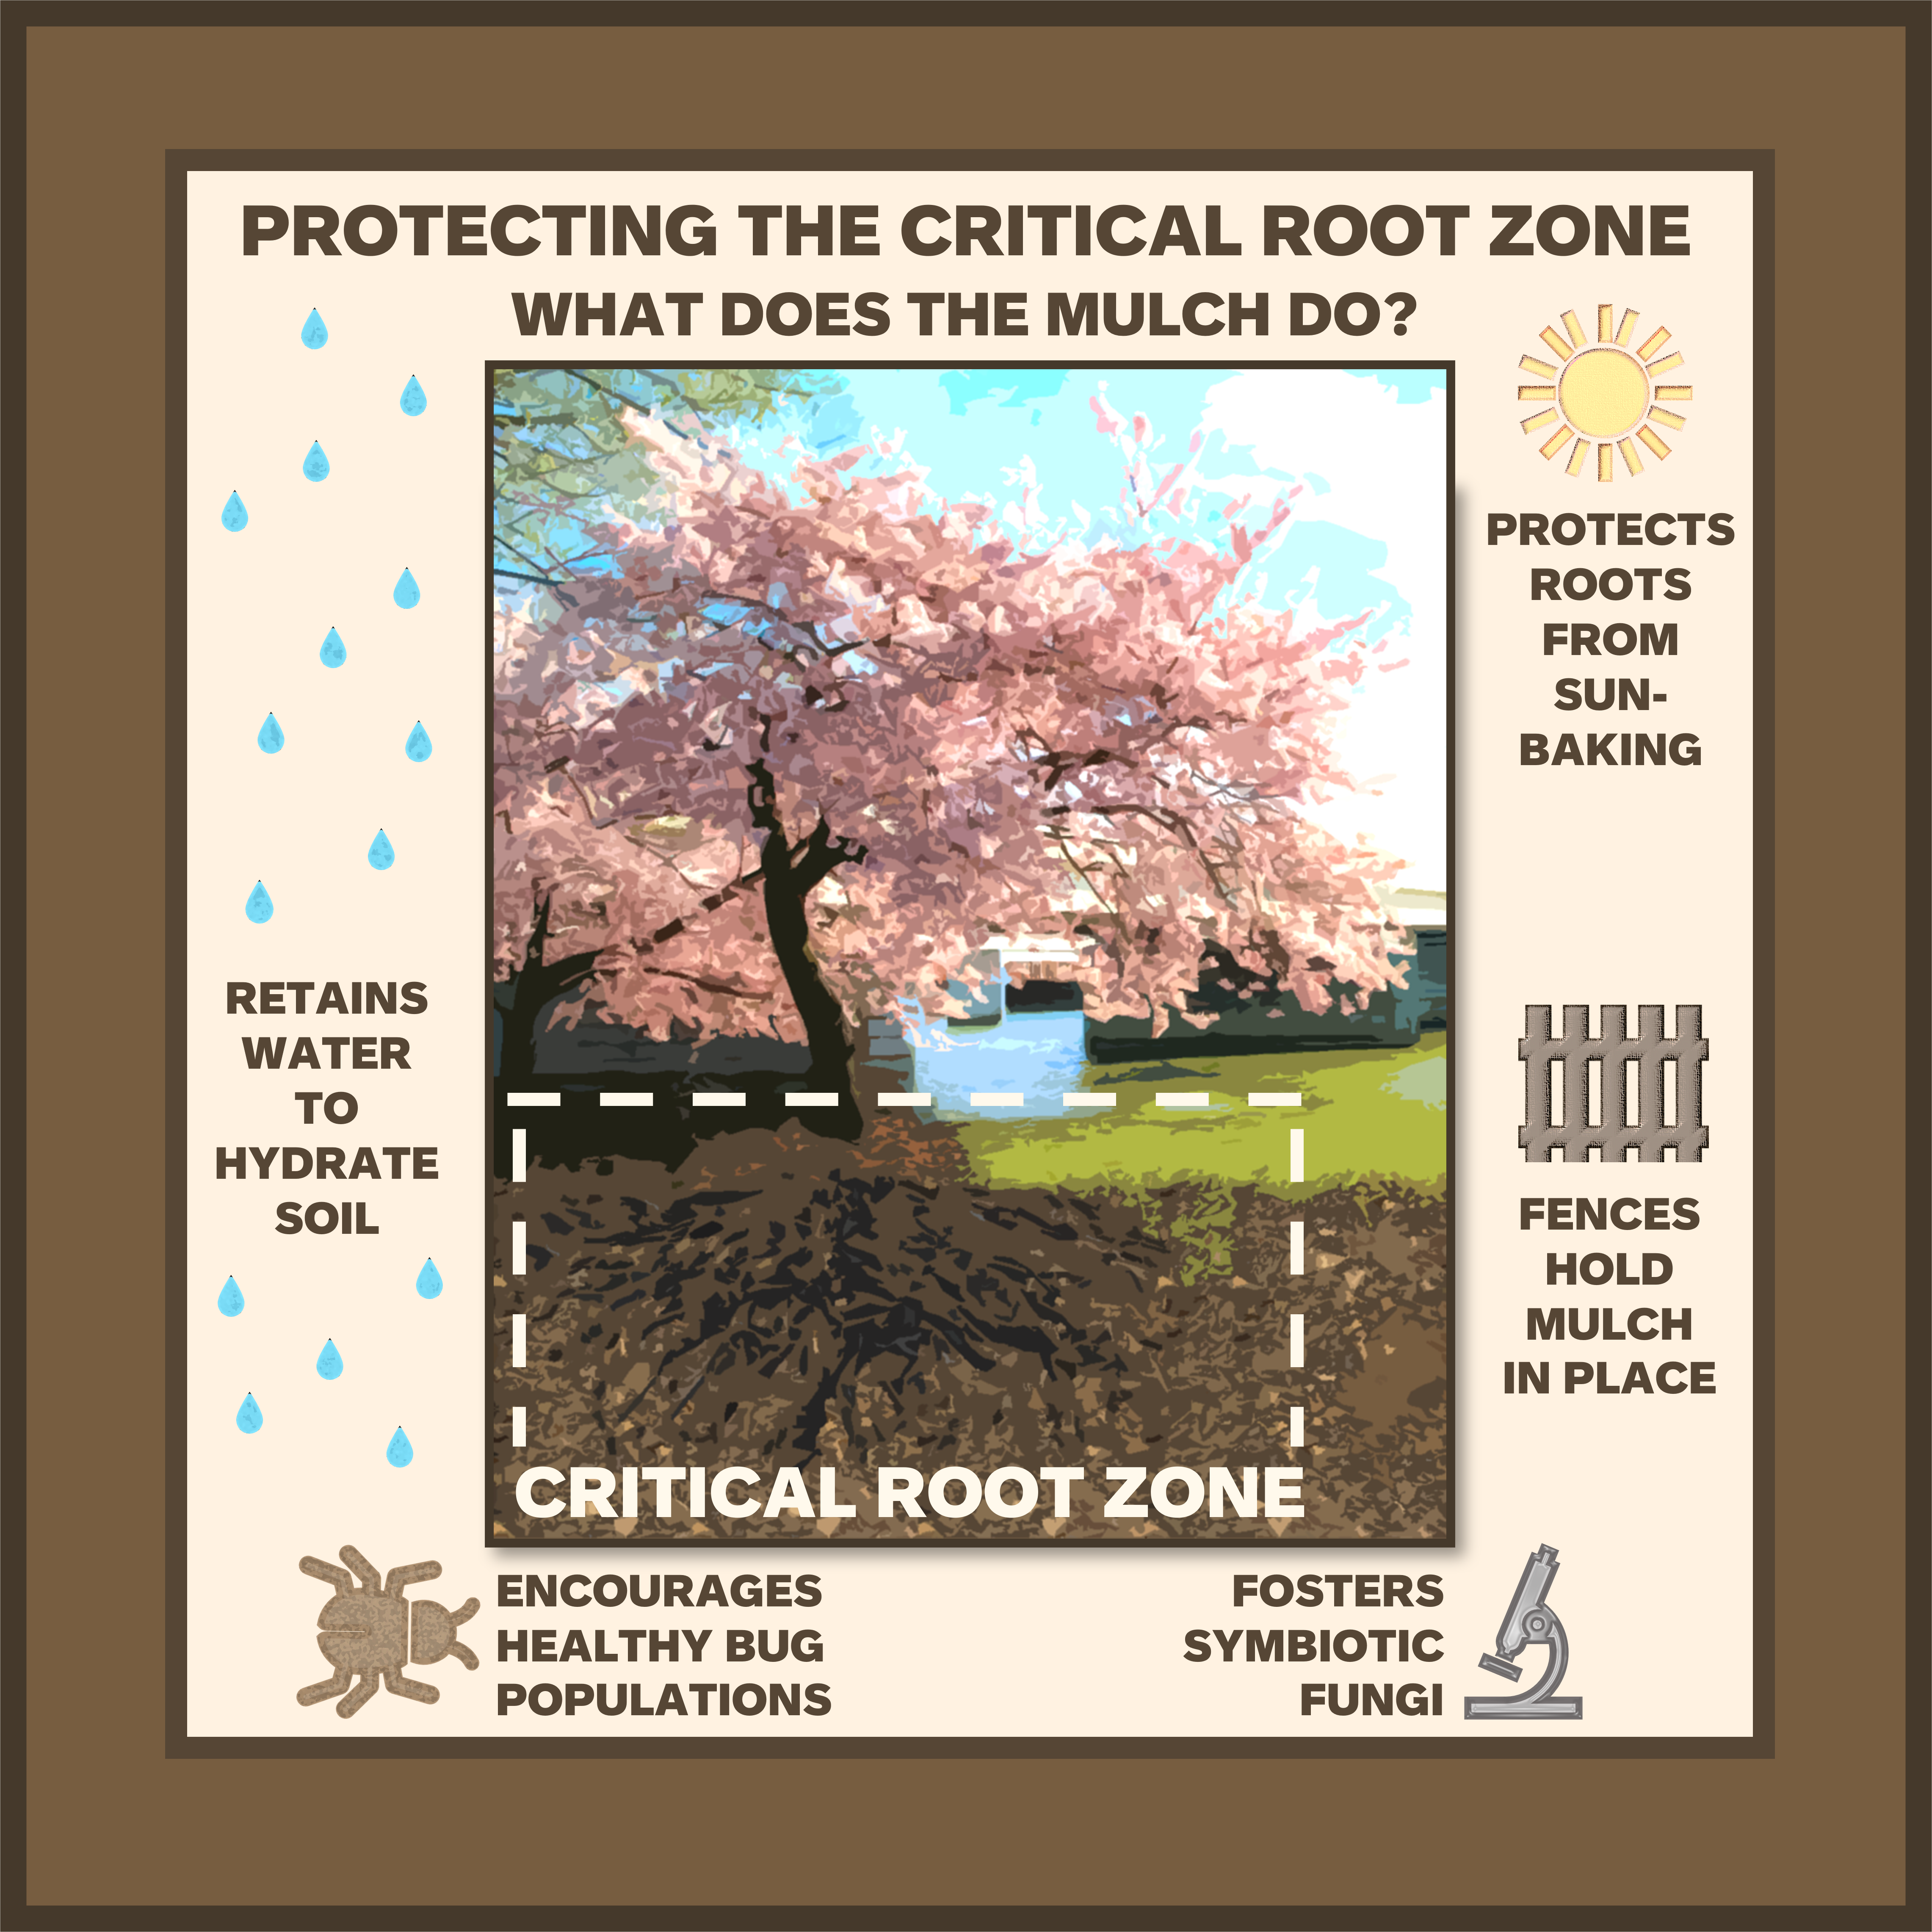 Caring for Cherry Trees in Washington DC - Cherry Blossom Festival (U.S.  National Park Service)